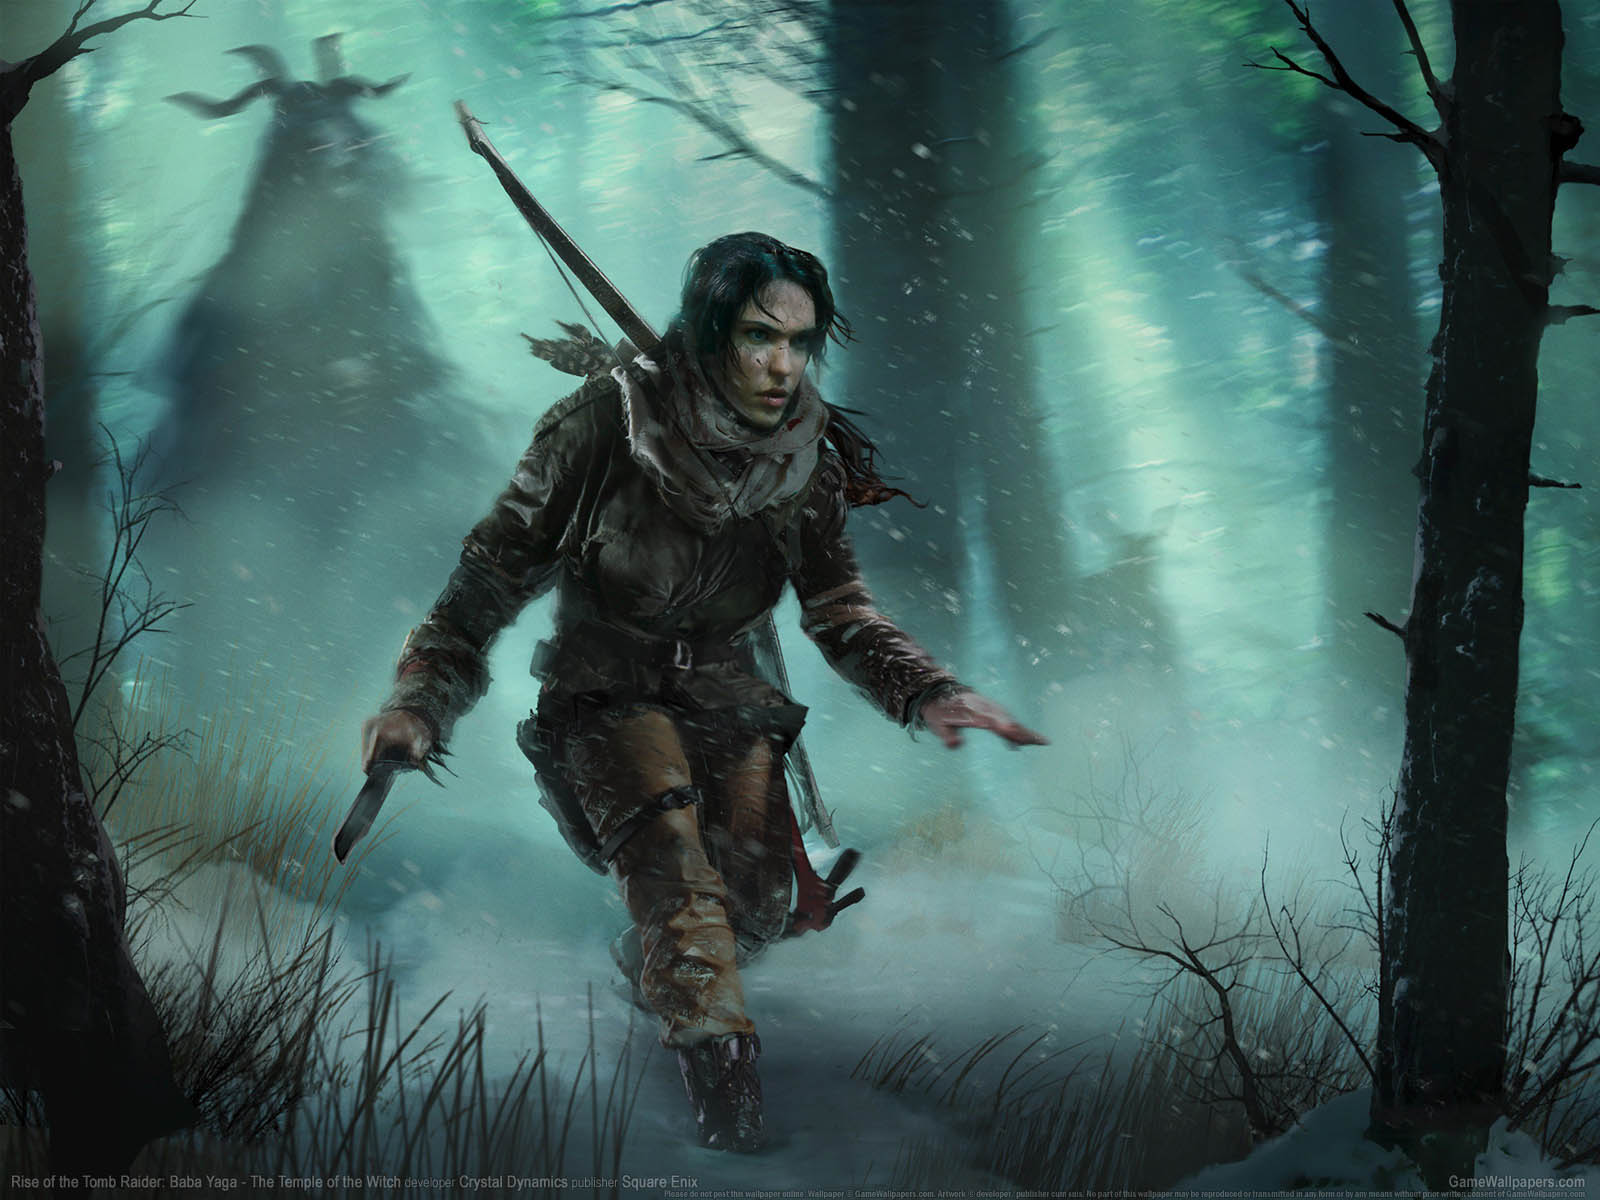 Rise of the Tomb Raider%253A Baba Yaga - The Temple of the Witch wallpaper 01 1600x1200